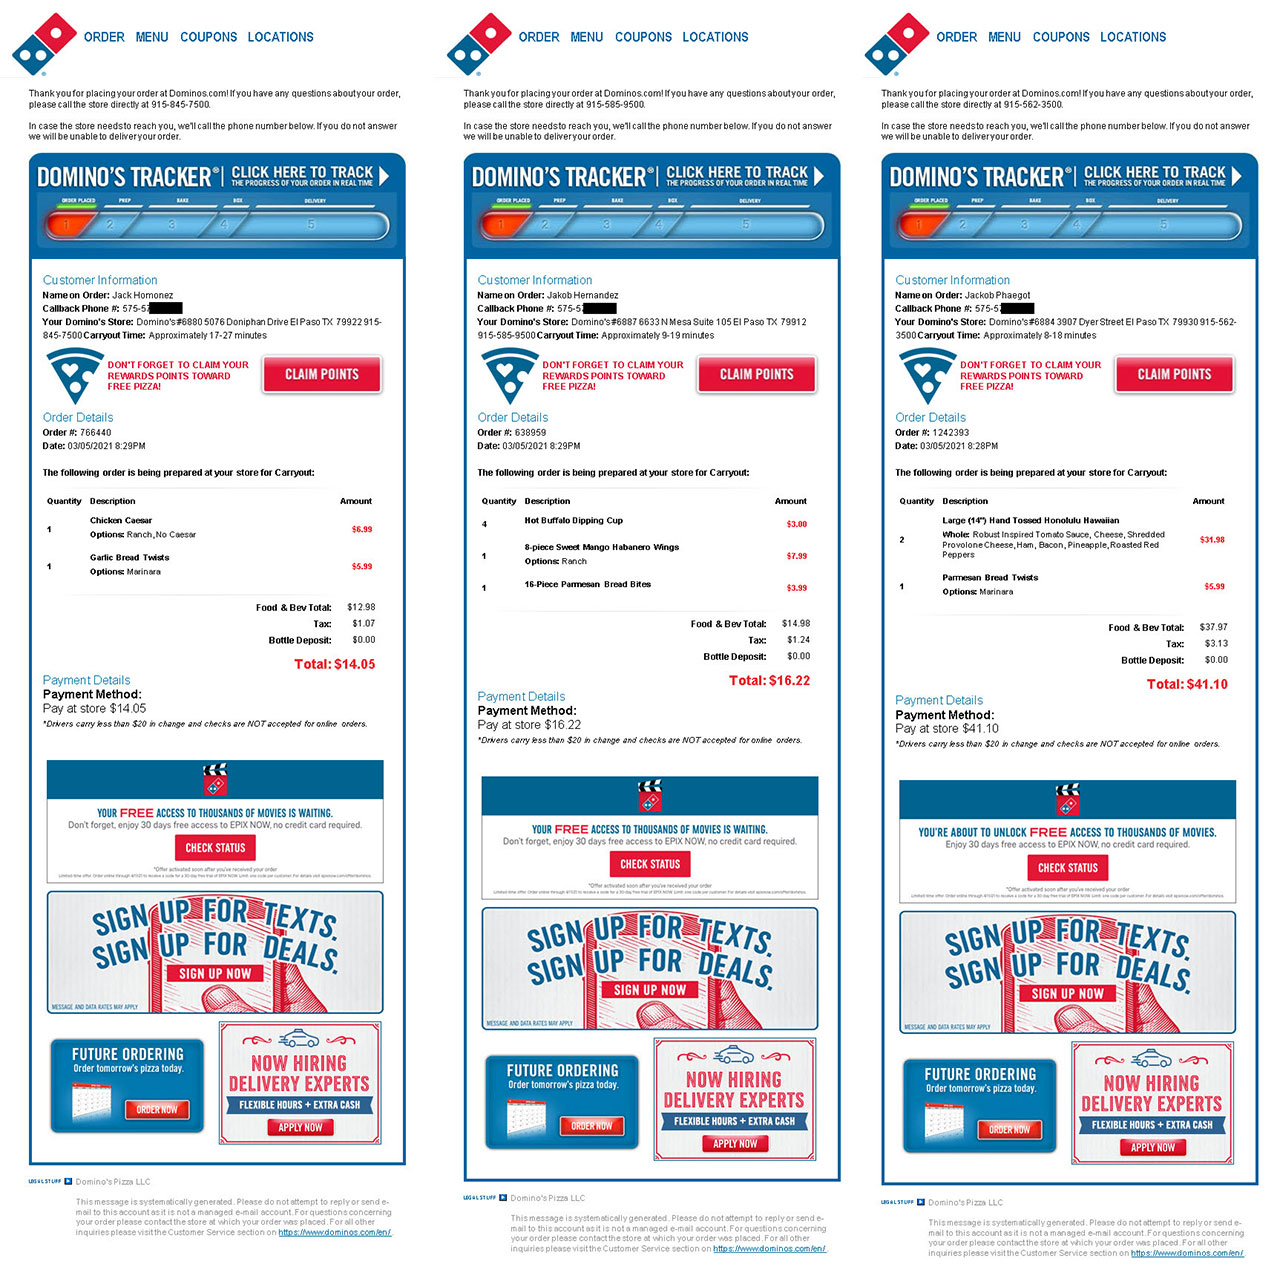 Fake Dominos orders, March 5, 2021.